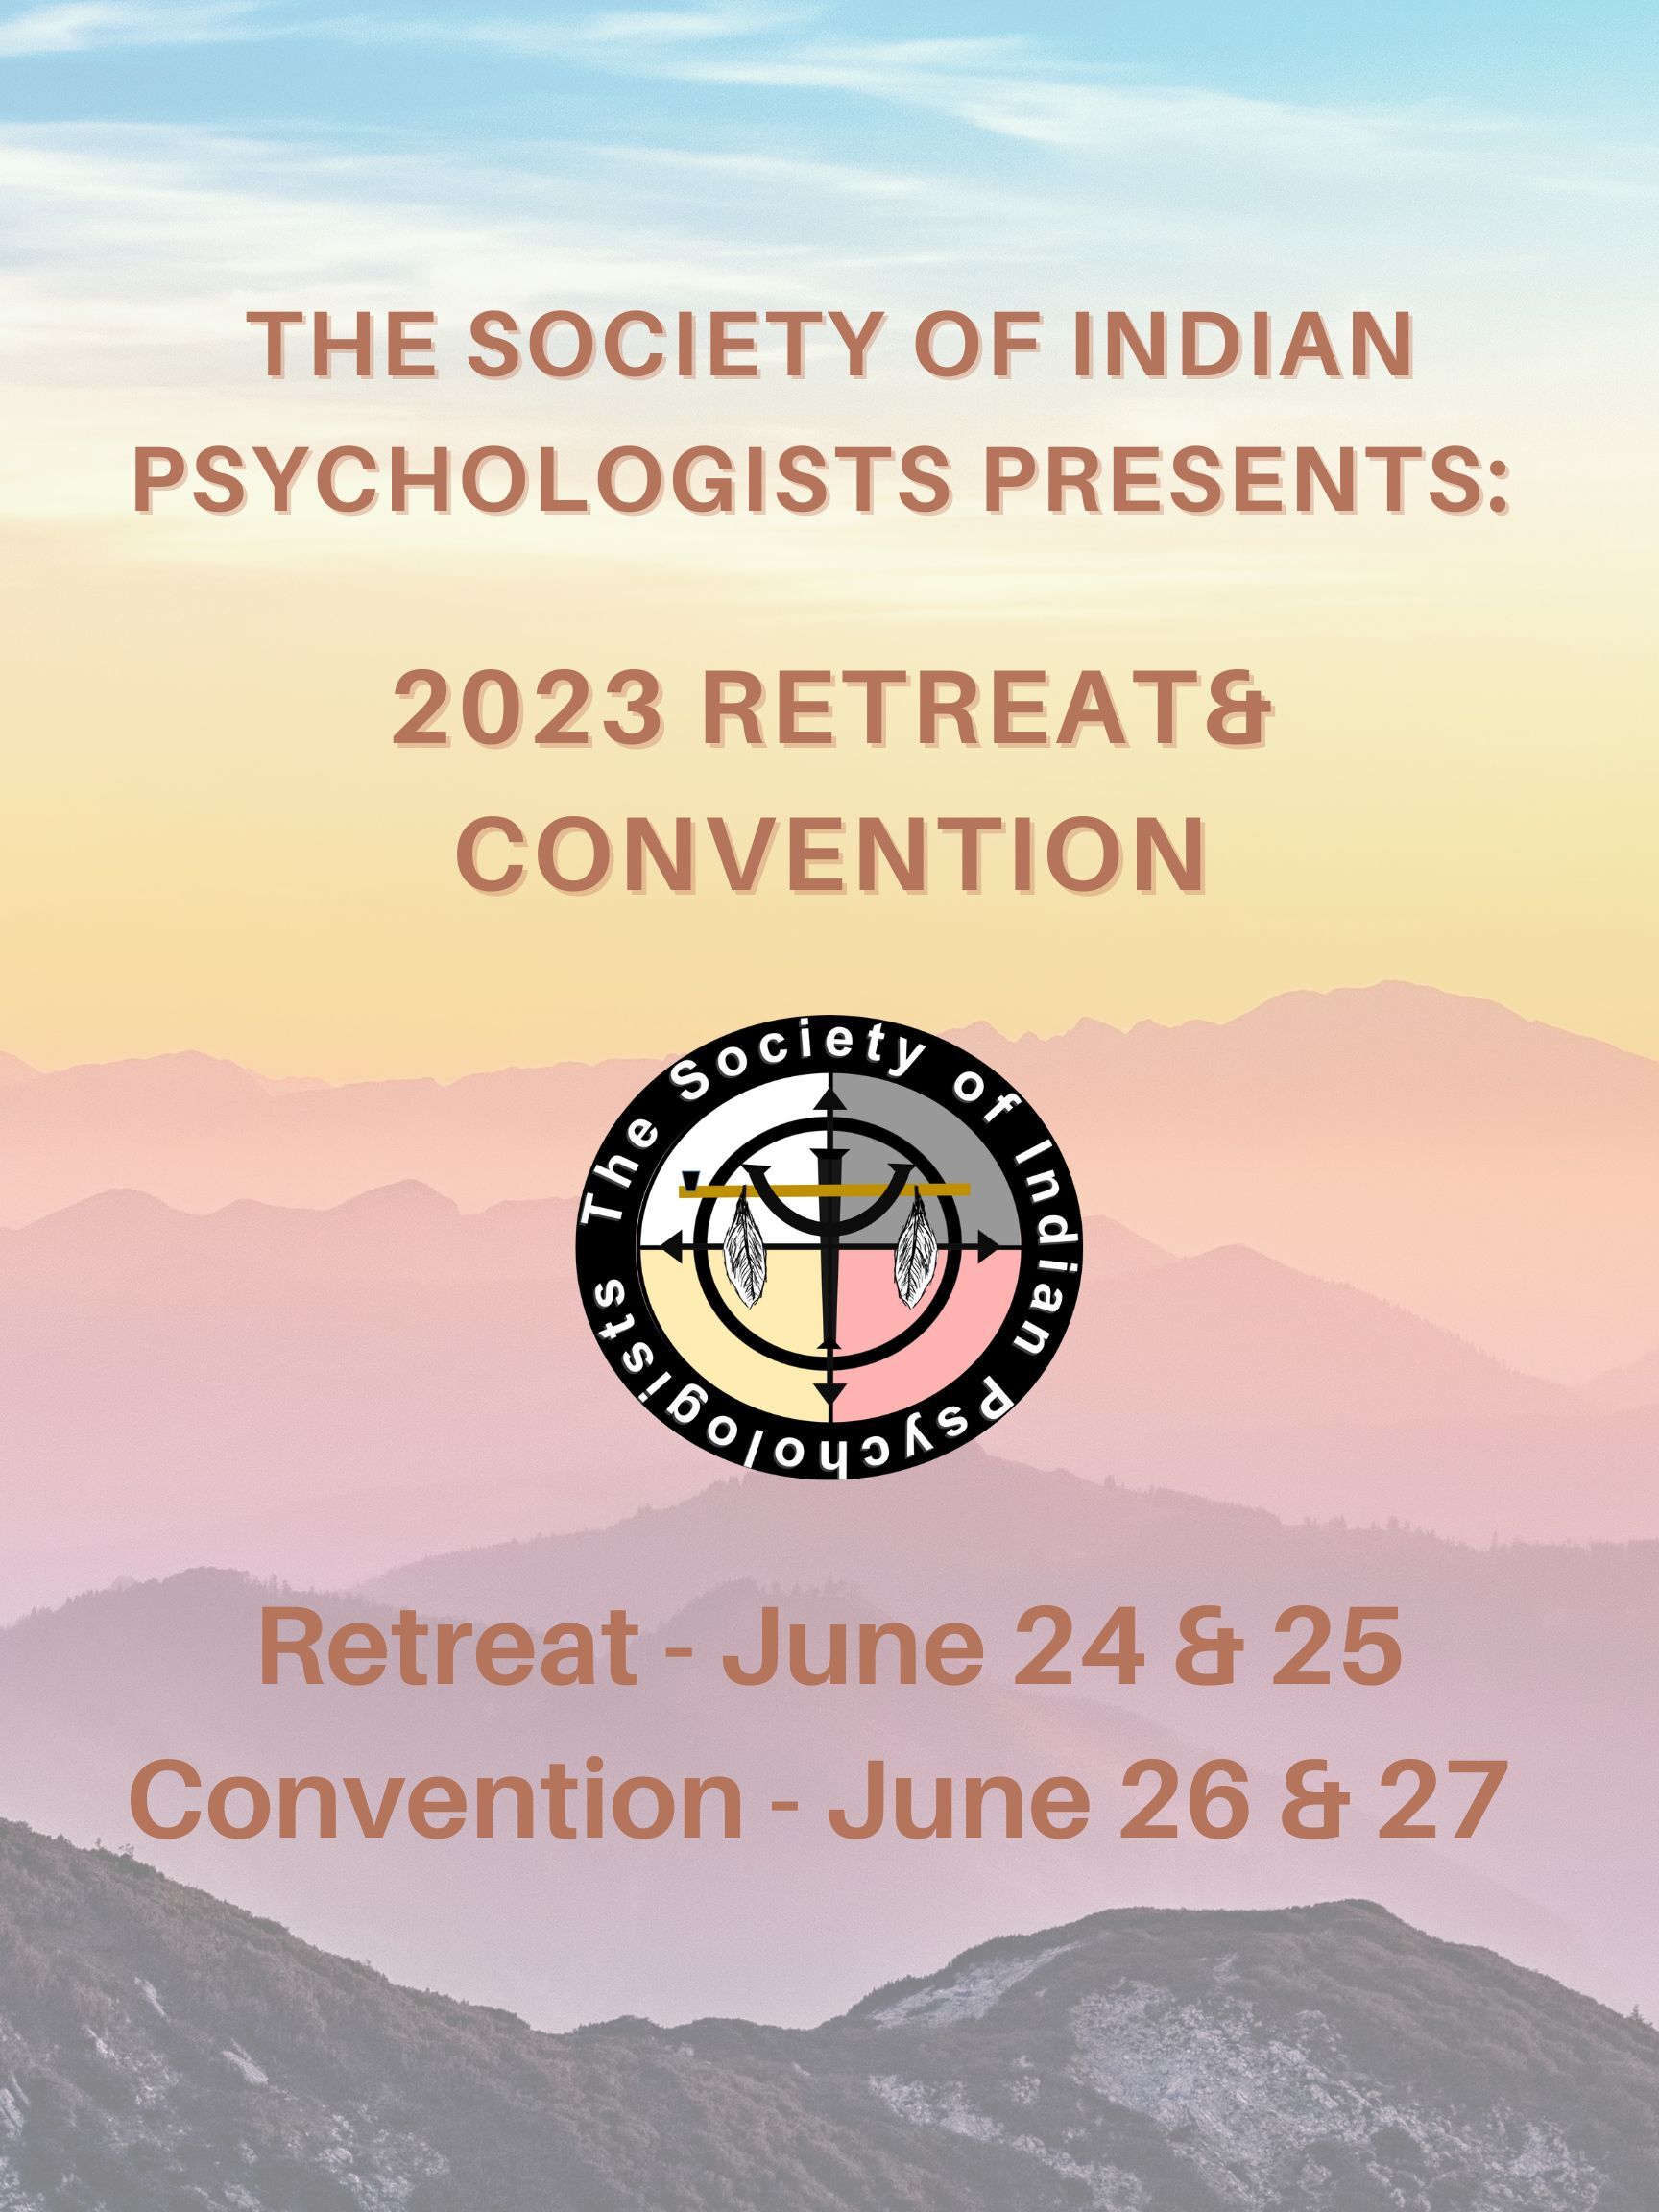 Save the Date. SIP Convention 2023. Retreat will be June 24-25, 2023. Connvention will be June 26-27, 2023.